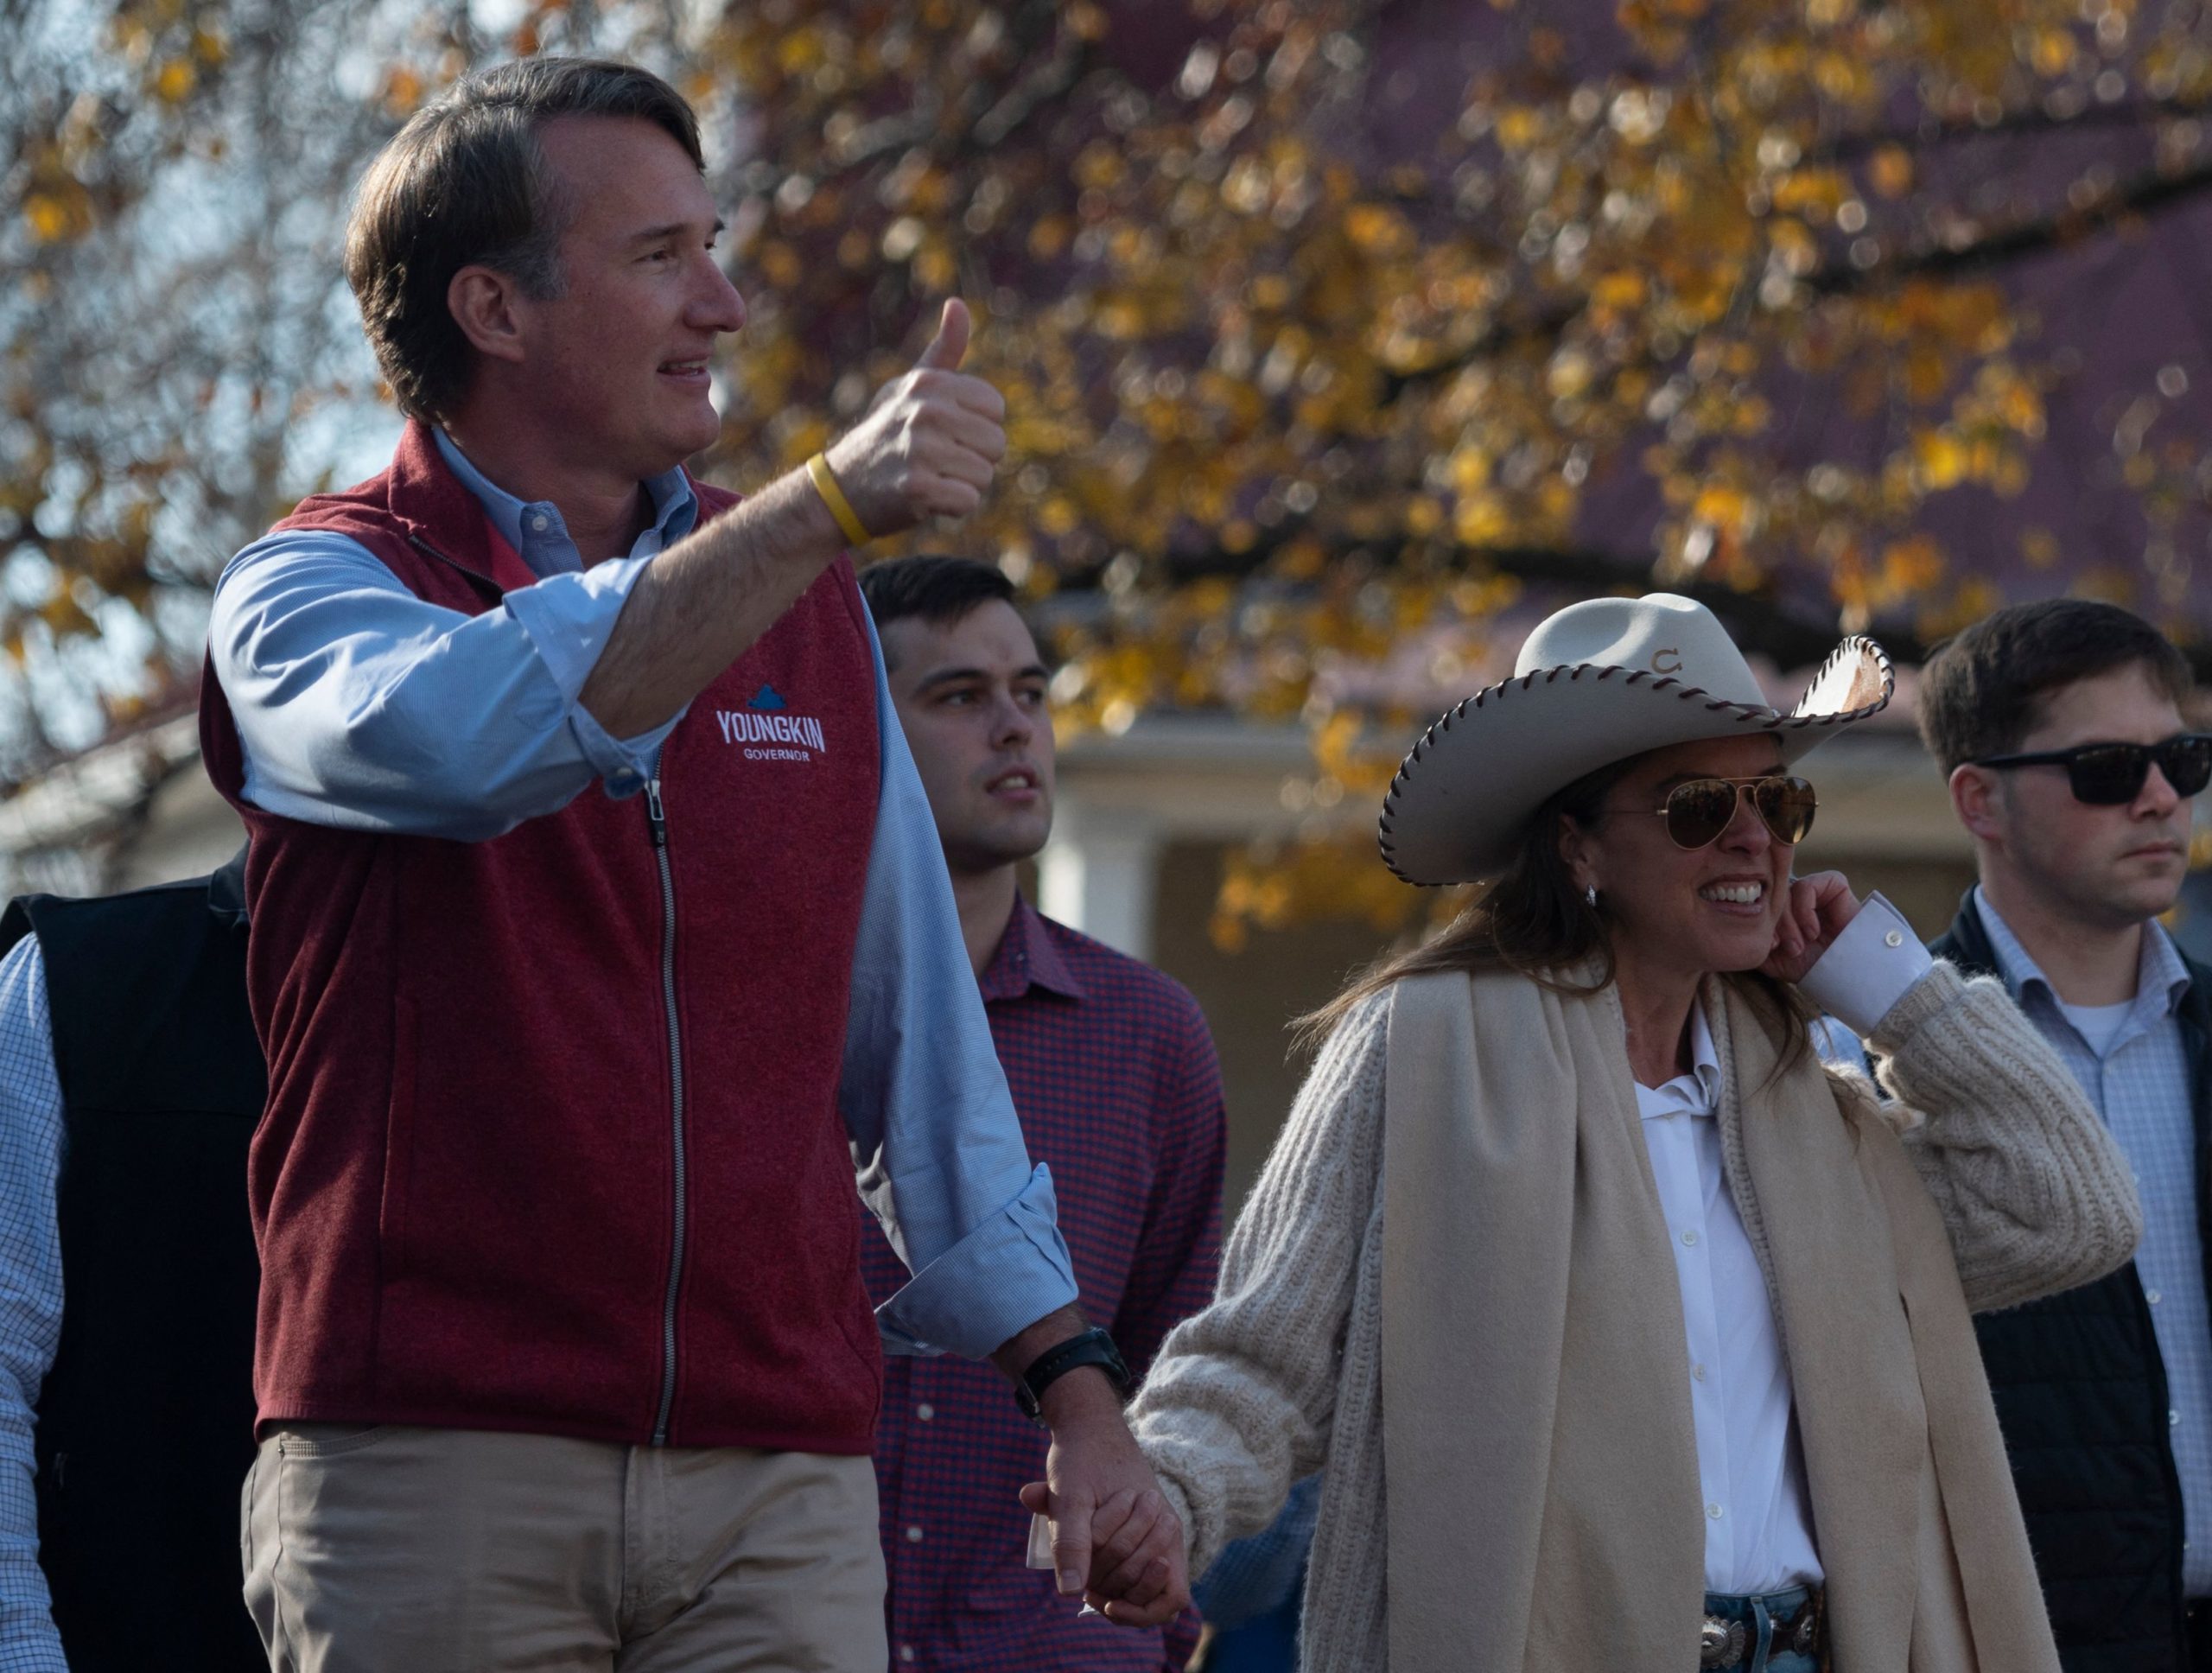 Virginia Governor elect, Glenn Youngkin (L), and his wife Suzanne Youngkin, attend the Christmas parade in Middleburg, Virginia on December 4, 2021. (Photo by ANDREW CABALLERO-REYNOLDS/AFP via Getty Images)